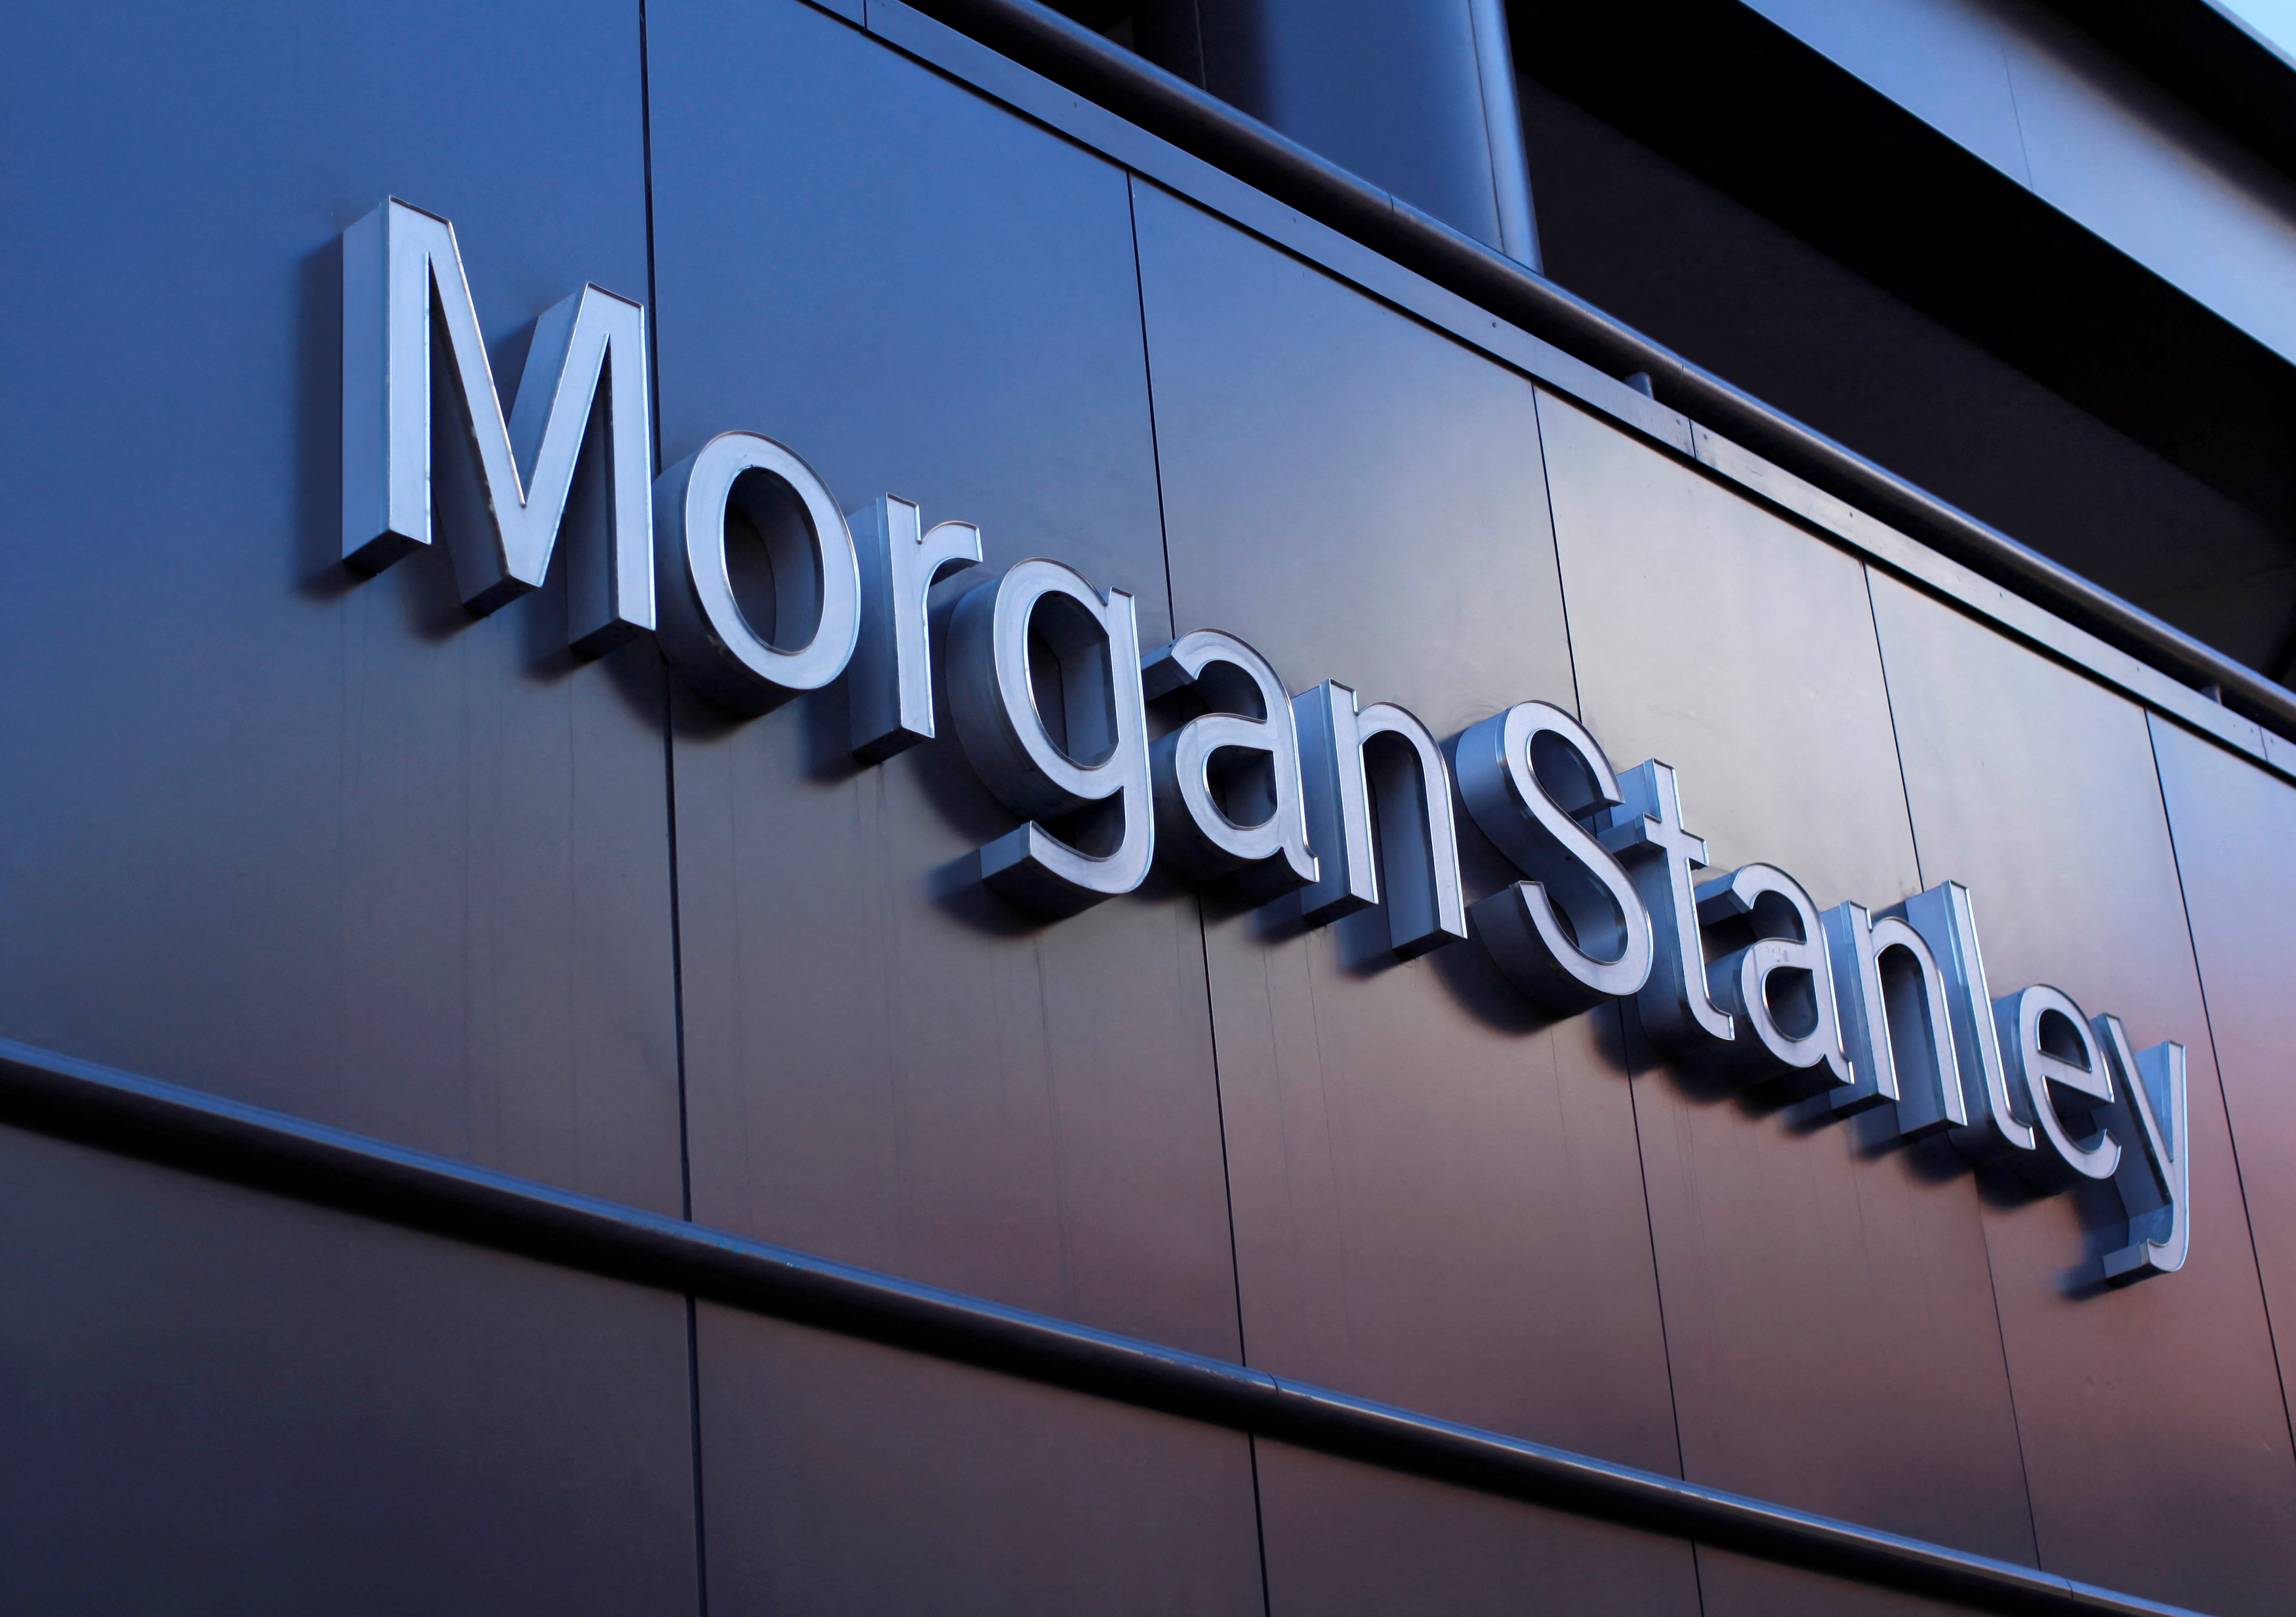 The corporate logo of financial firm Morgan Stanley is pictured on a building in San Diego